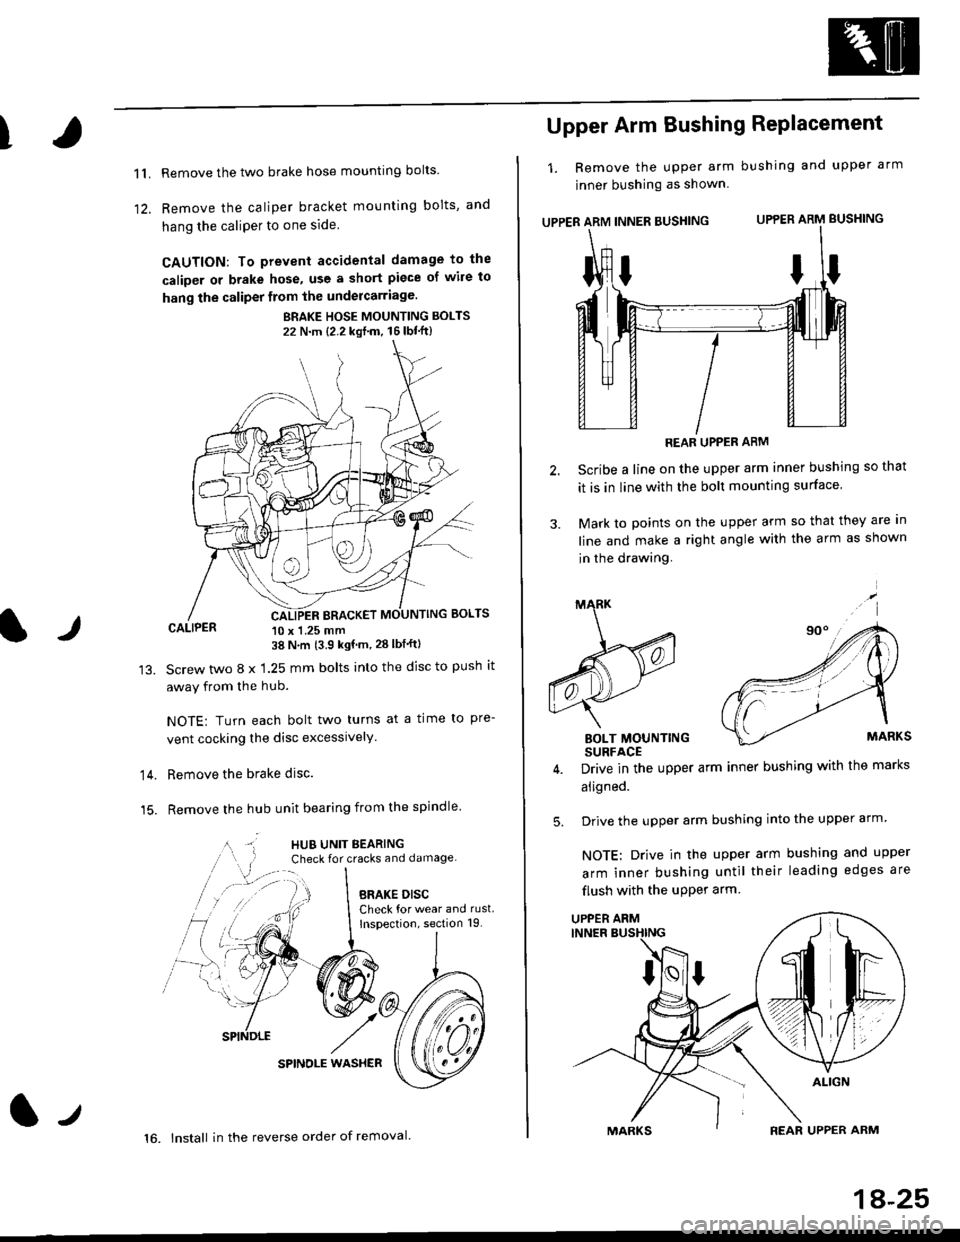 HONDA CIVIC 1999 6.G Owners Manual T
11.
1)
Remove the two brake hose mounting bolts
Remove the caliper b.acket mounting bolts, and
hang the caliPer to one side
CAUTION: To prevent accidental damage to the
caliper or brake hose, use a 